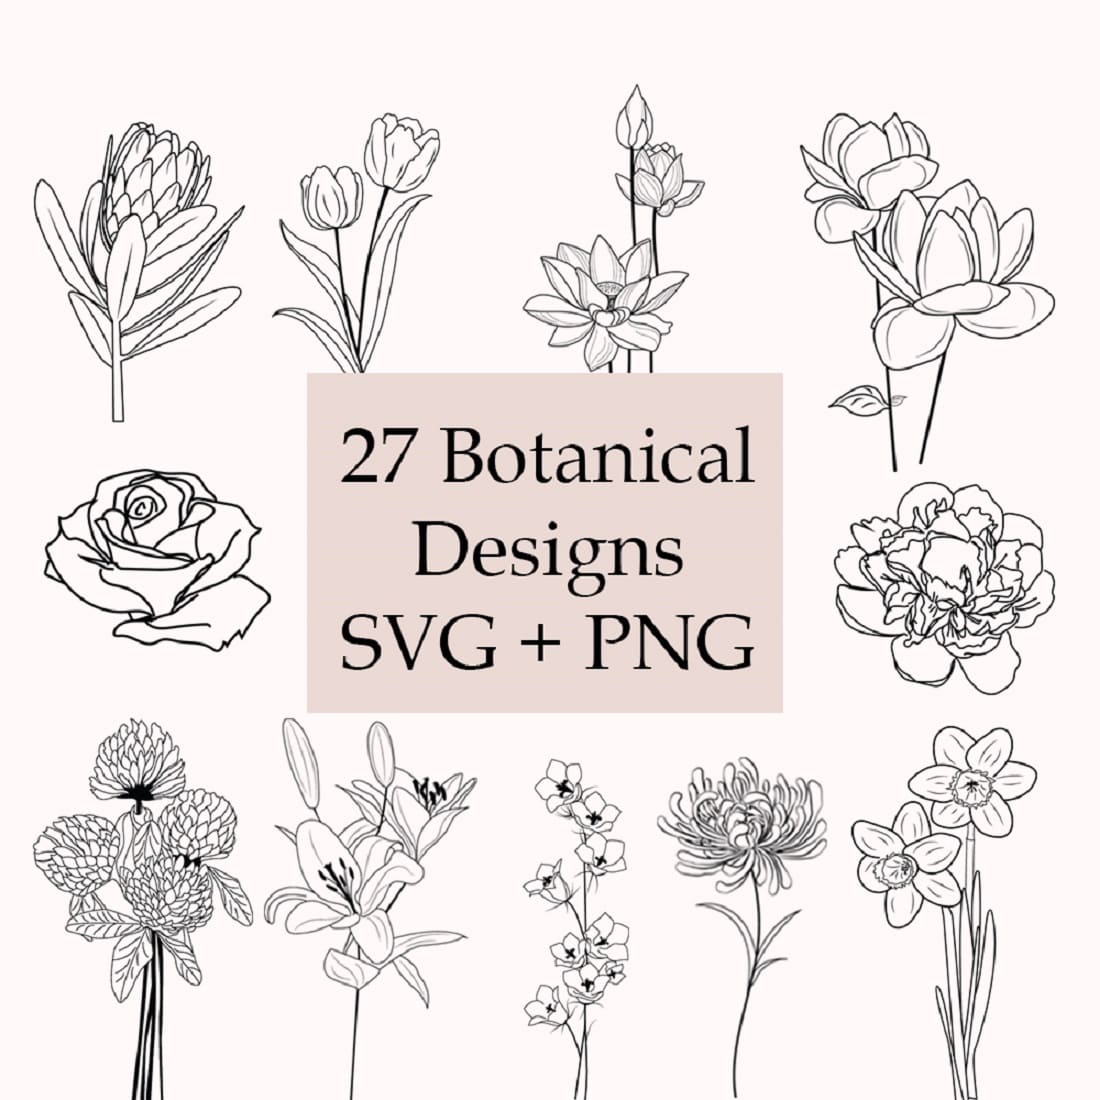 Botanical SVG image on white baclground, main picture 1100x1100.